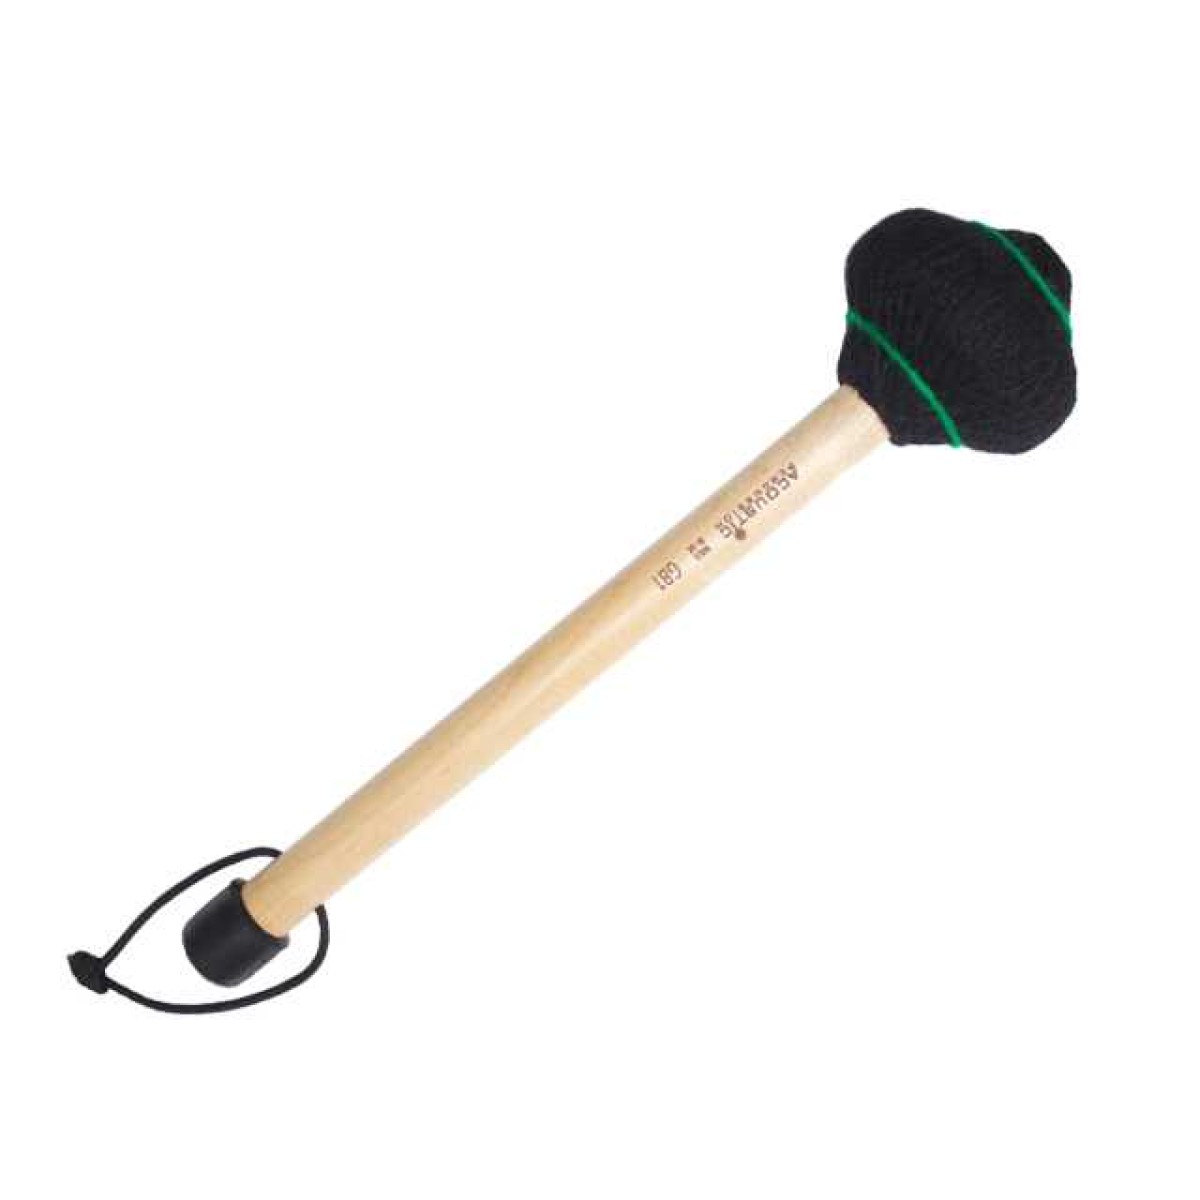 Acoustic Percussion GB1 Articulate Gong Mallet